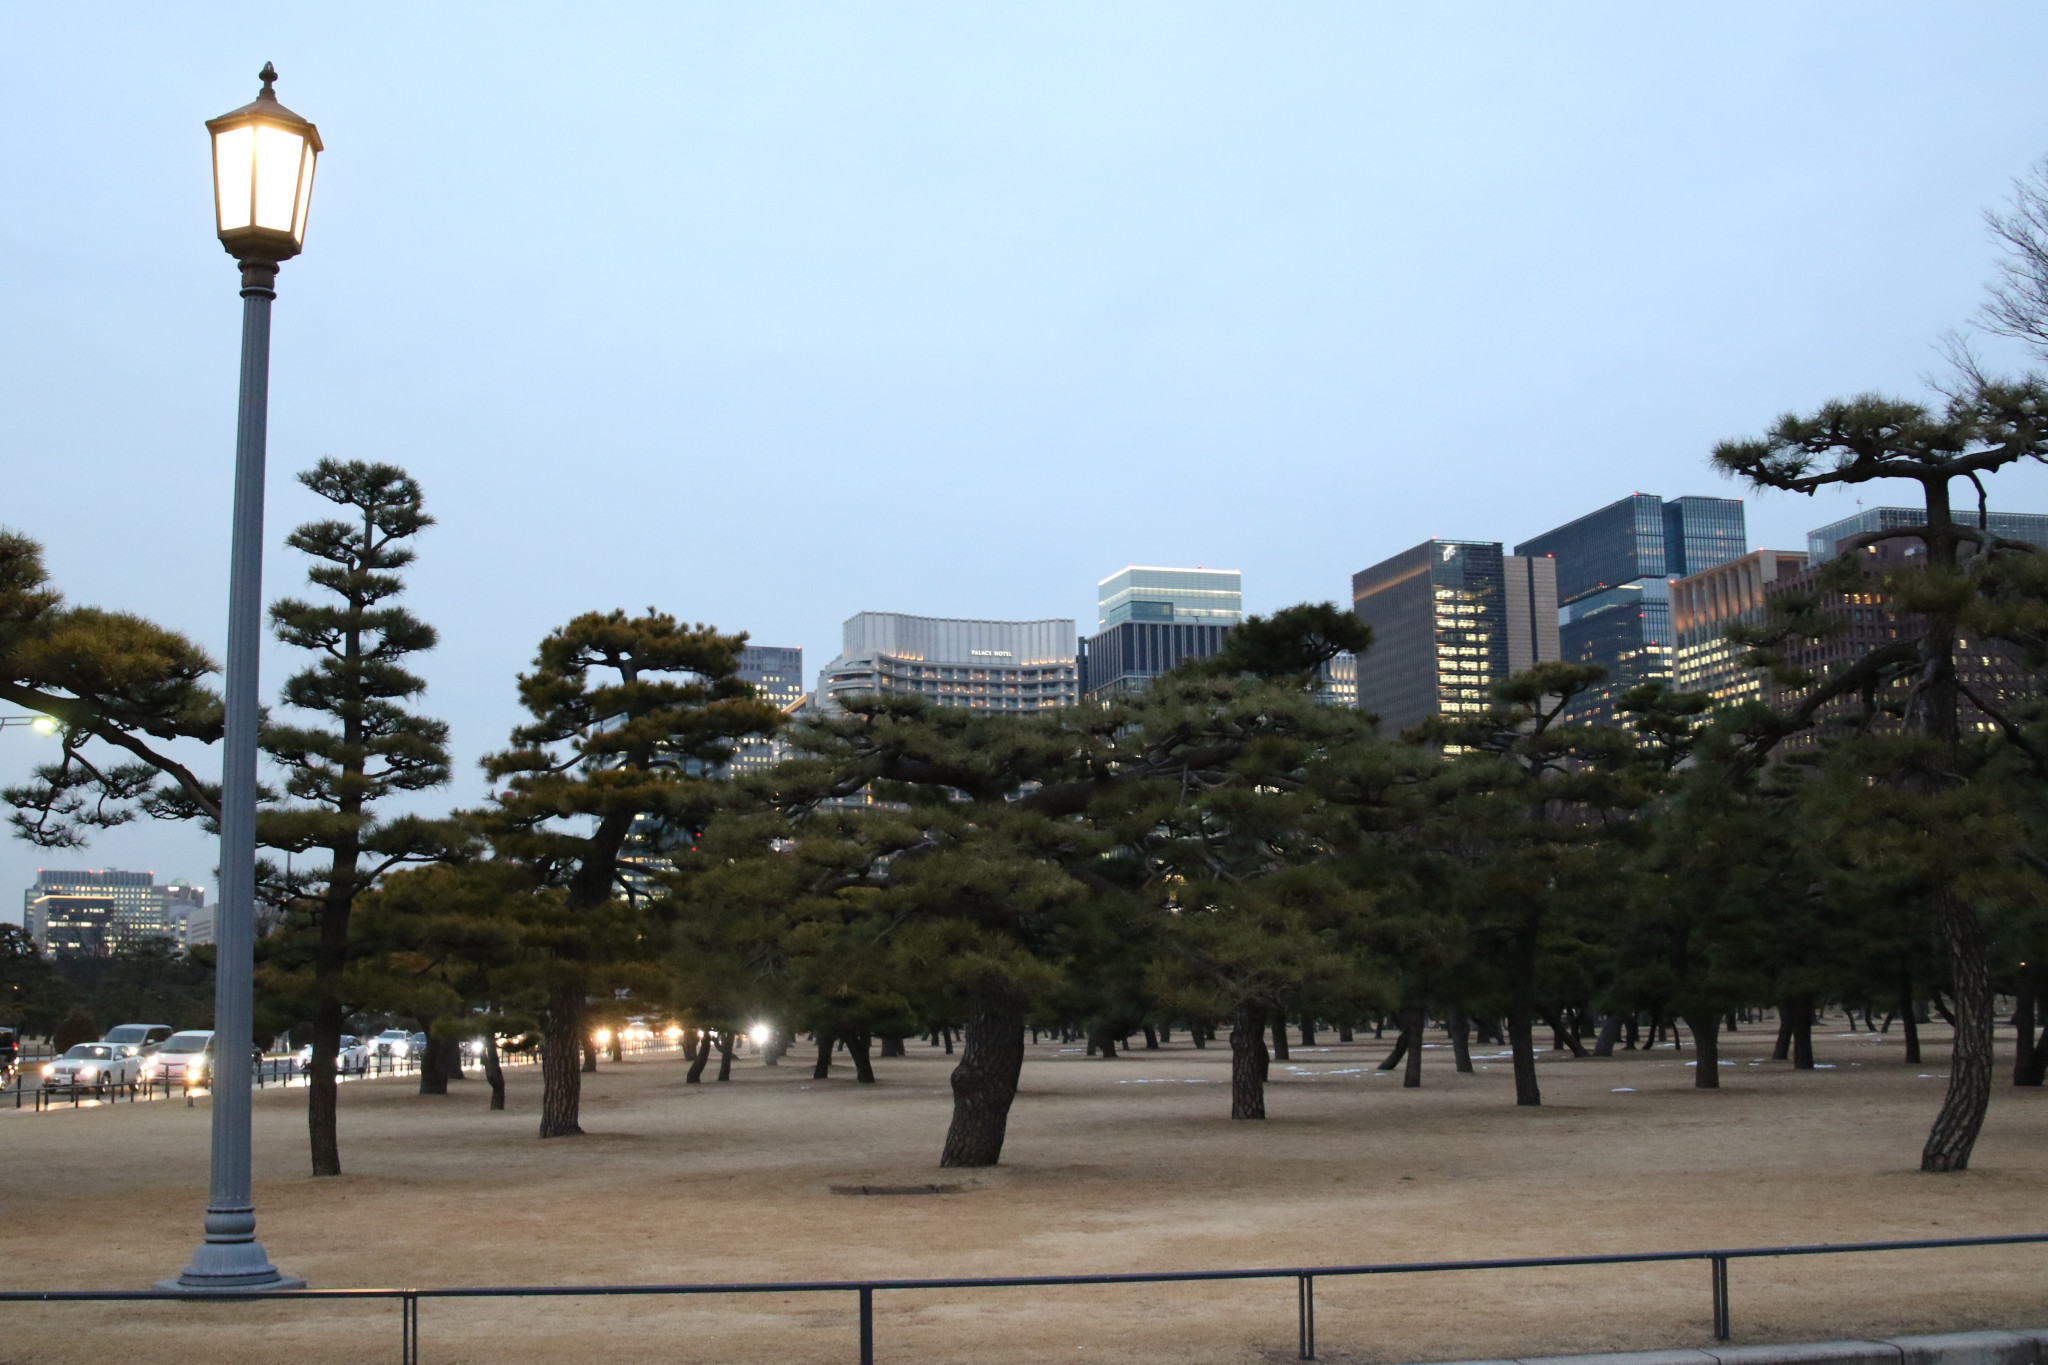 The Imperial Palace Garden will serve as the venue for race walking events ©Tokyo 2020